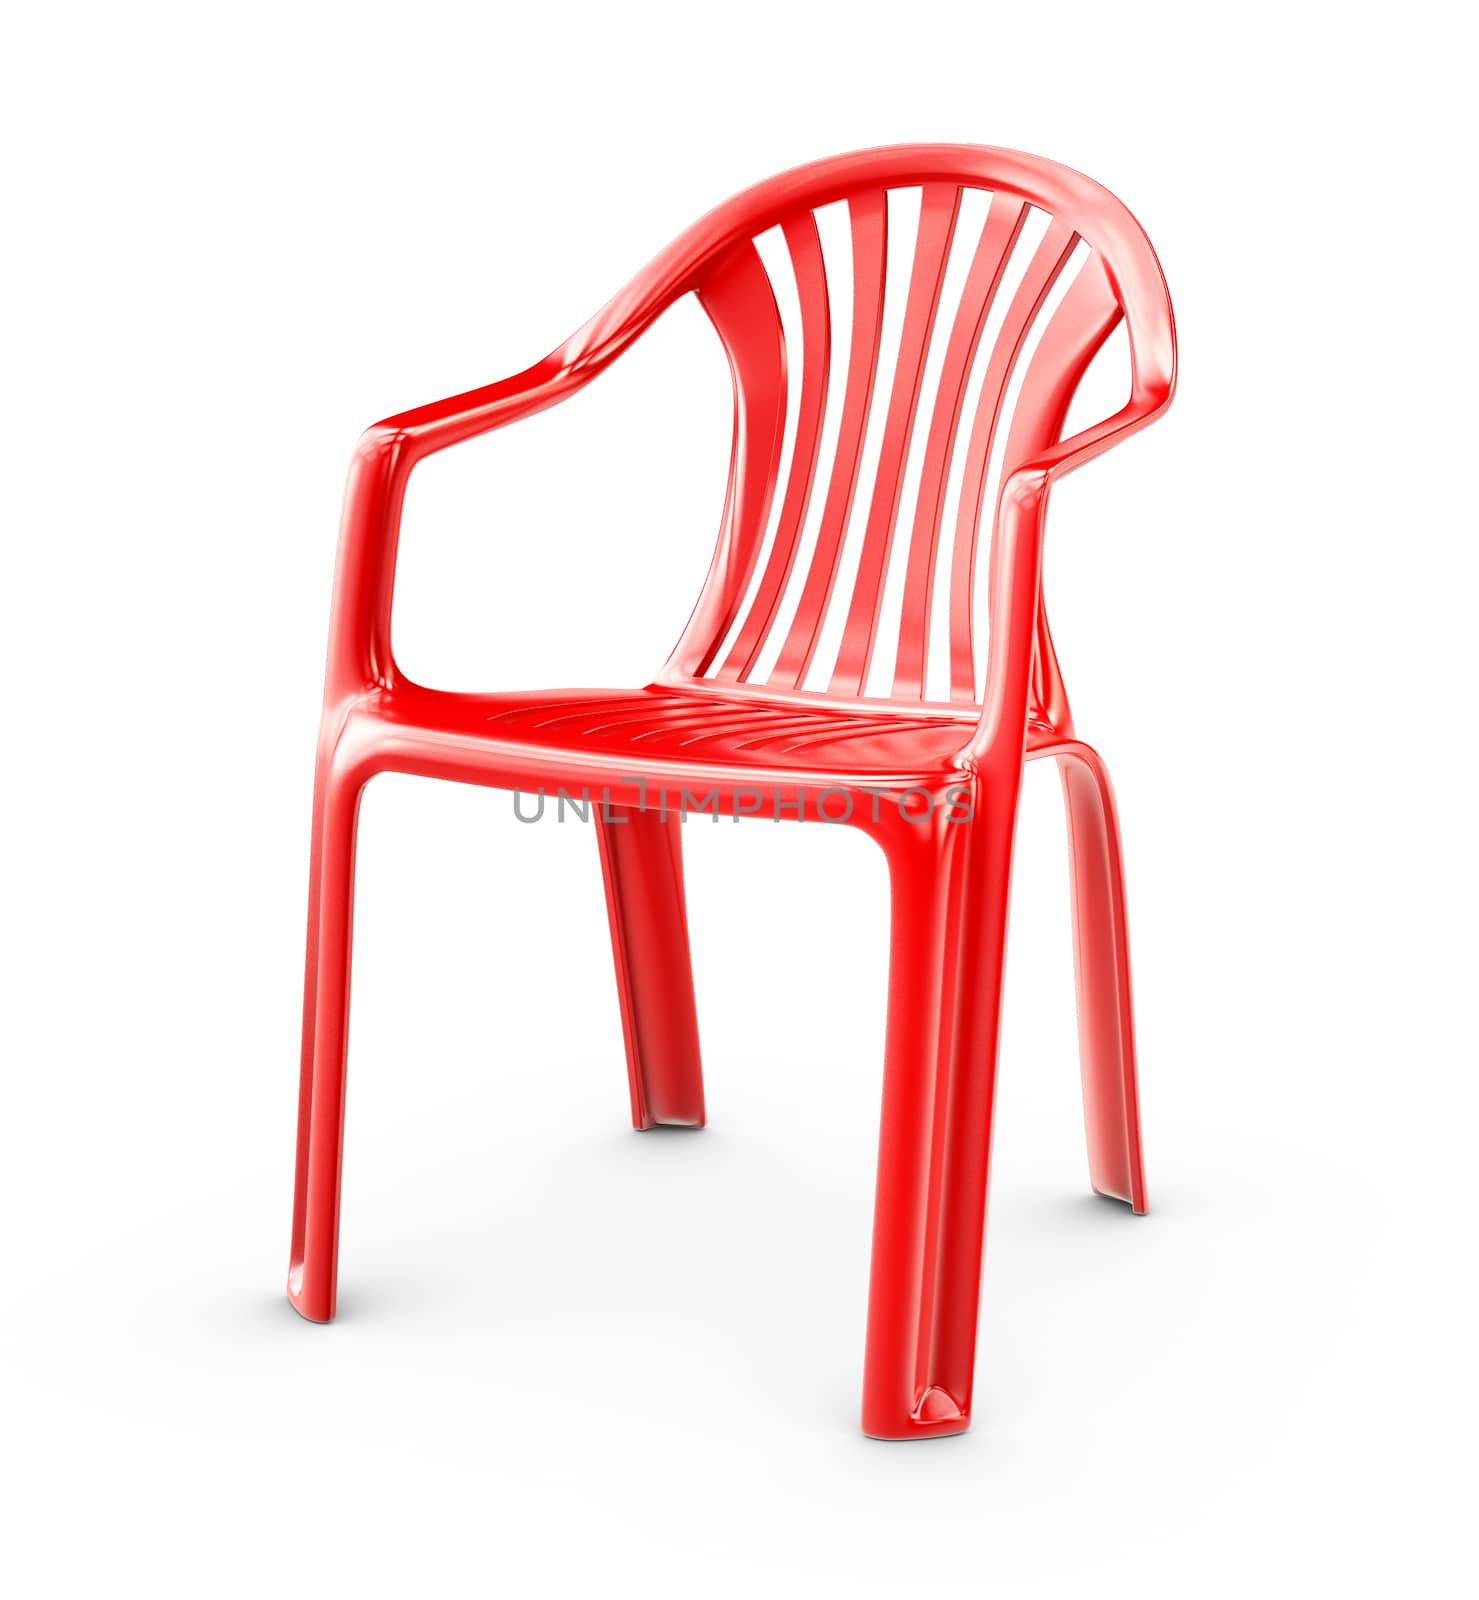 3d Rendering of Red plastic chair on a white background by tussik